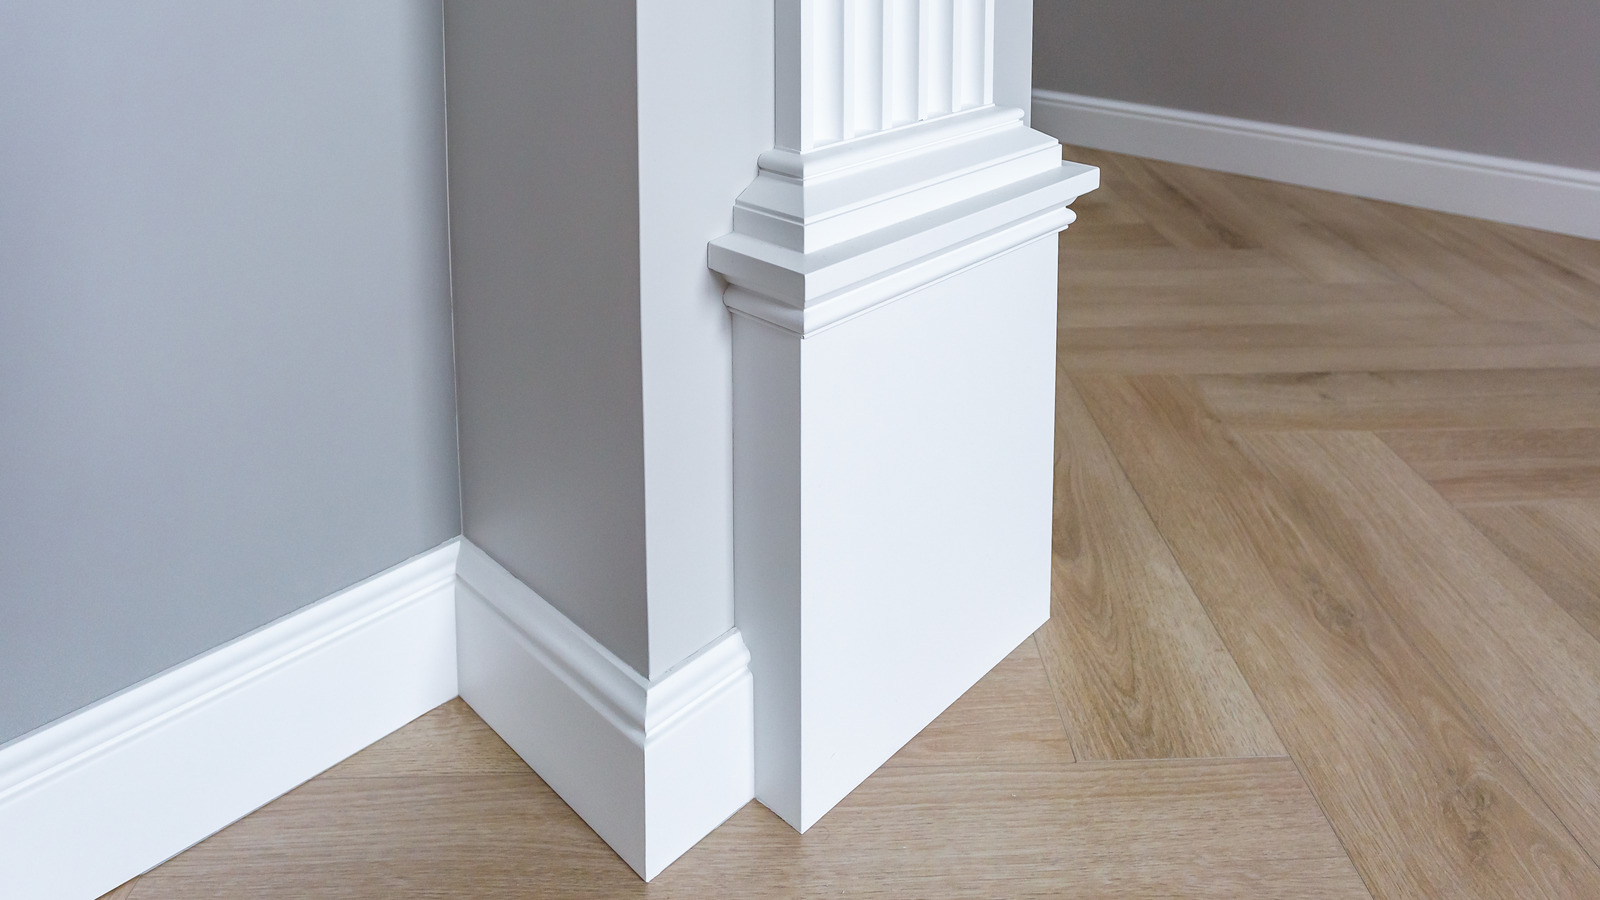 How to Clean Baseboards - The Home Depot